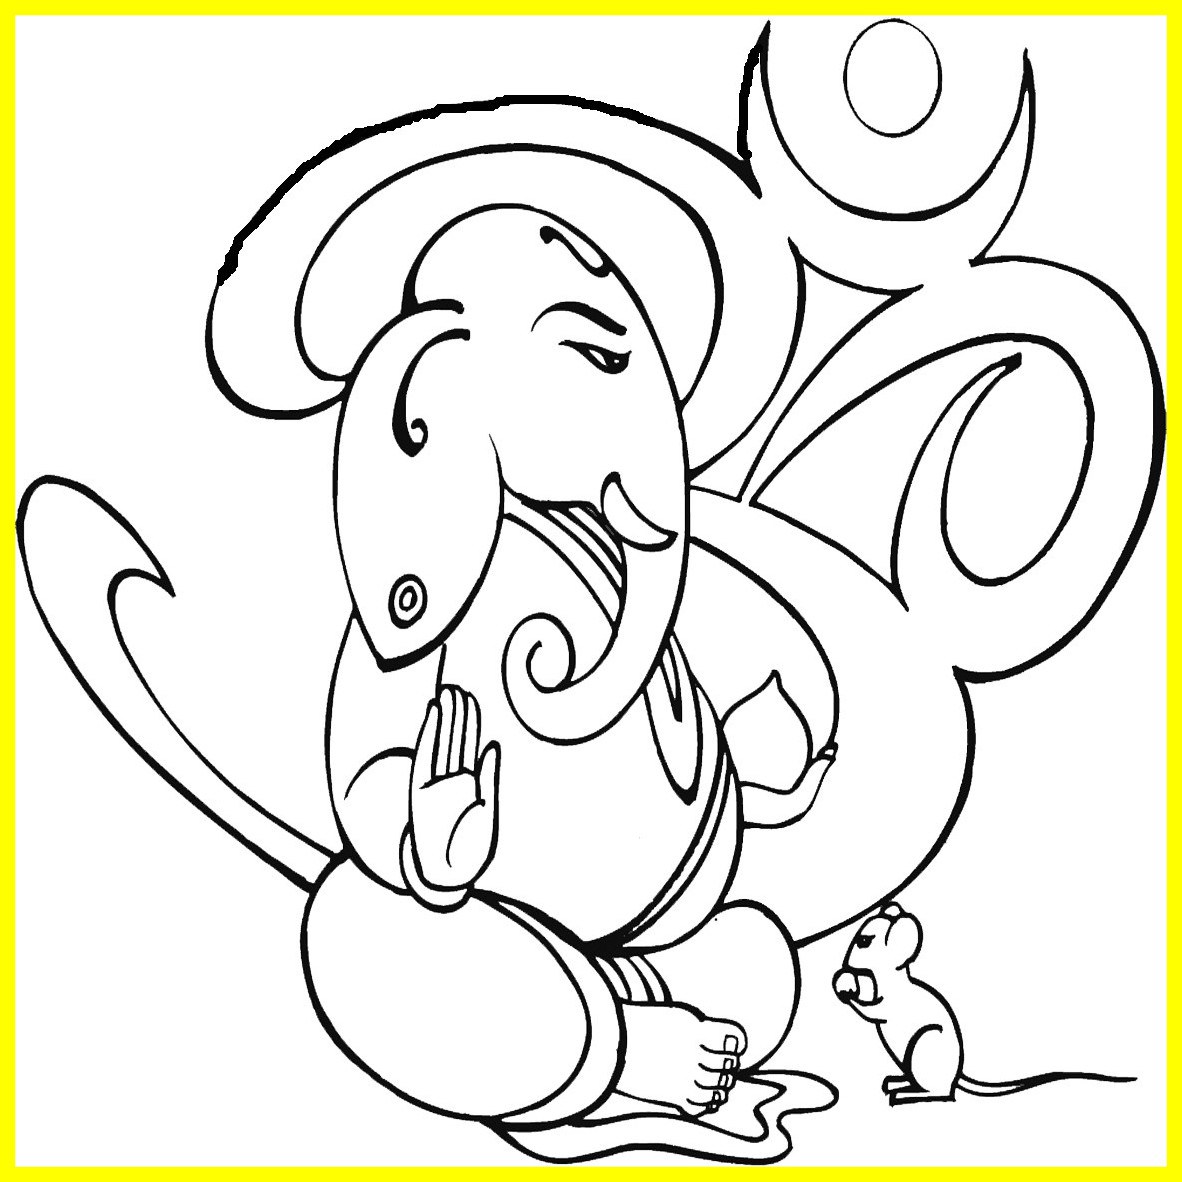 Ganesha Coloring Pages For Kids at GetColorings.com | Free printable ...